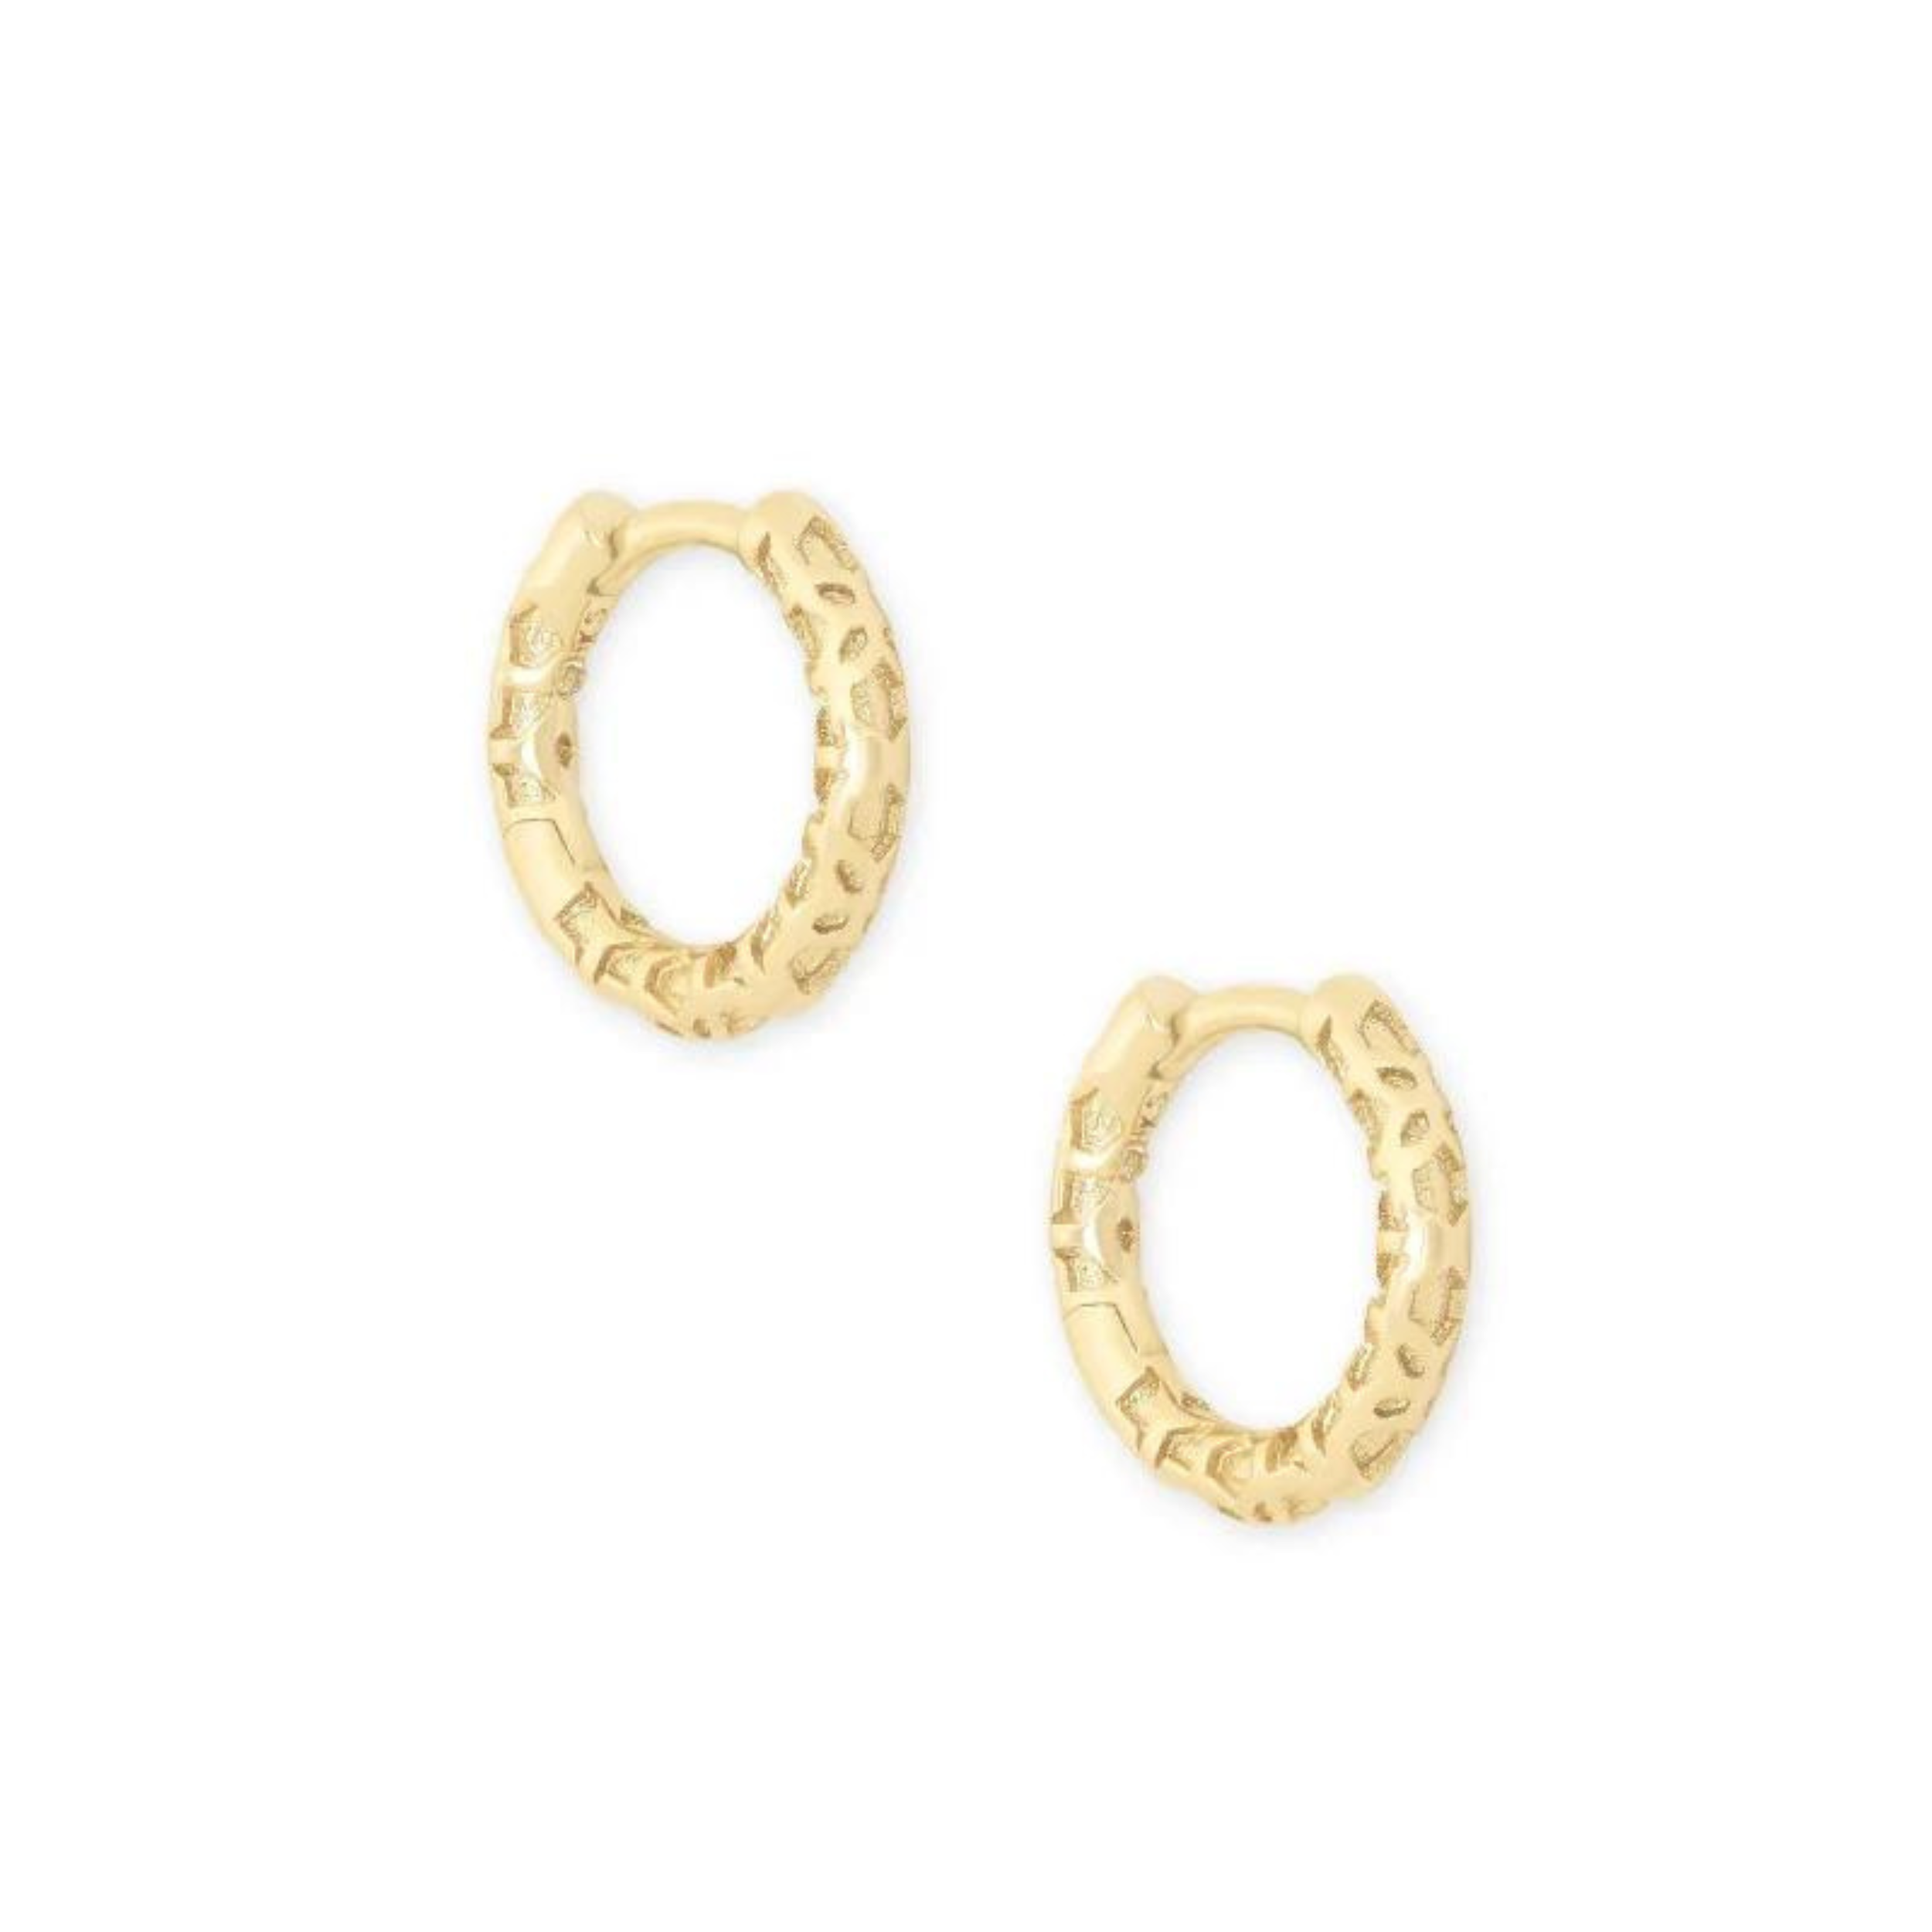 Gold huggie earrings with filigree detailing, pictured on a white background.